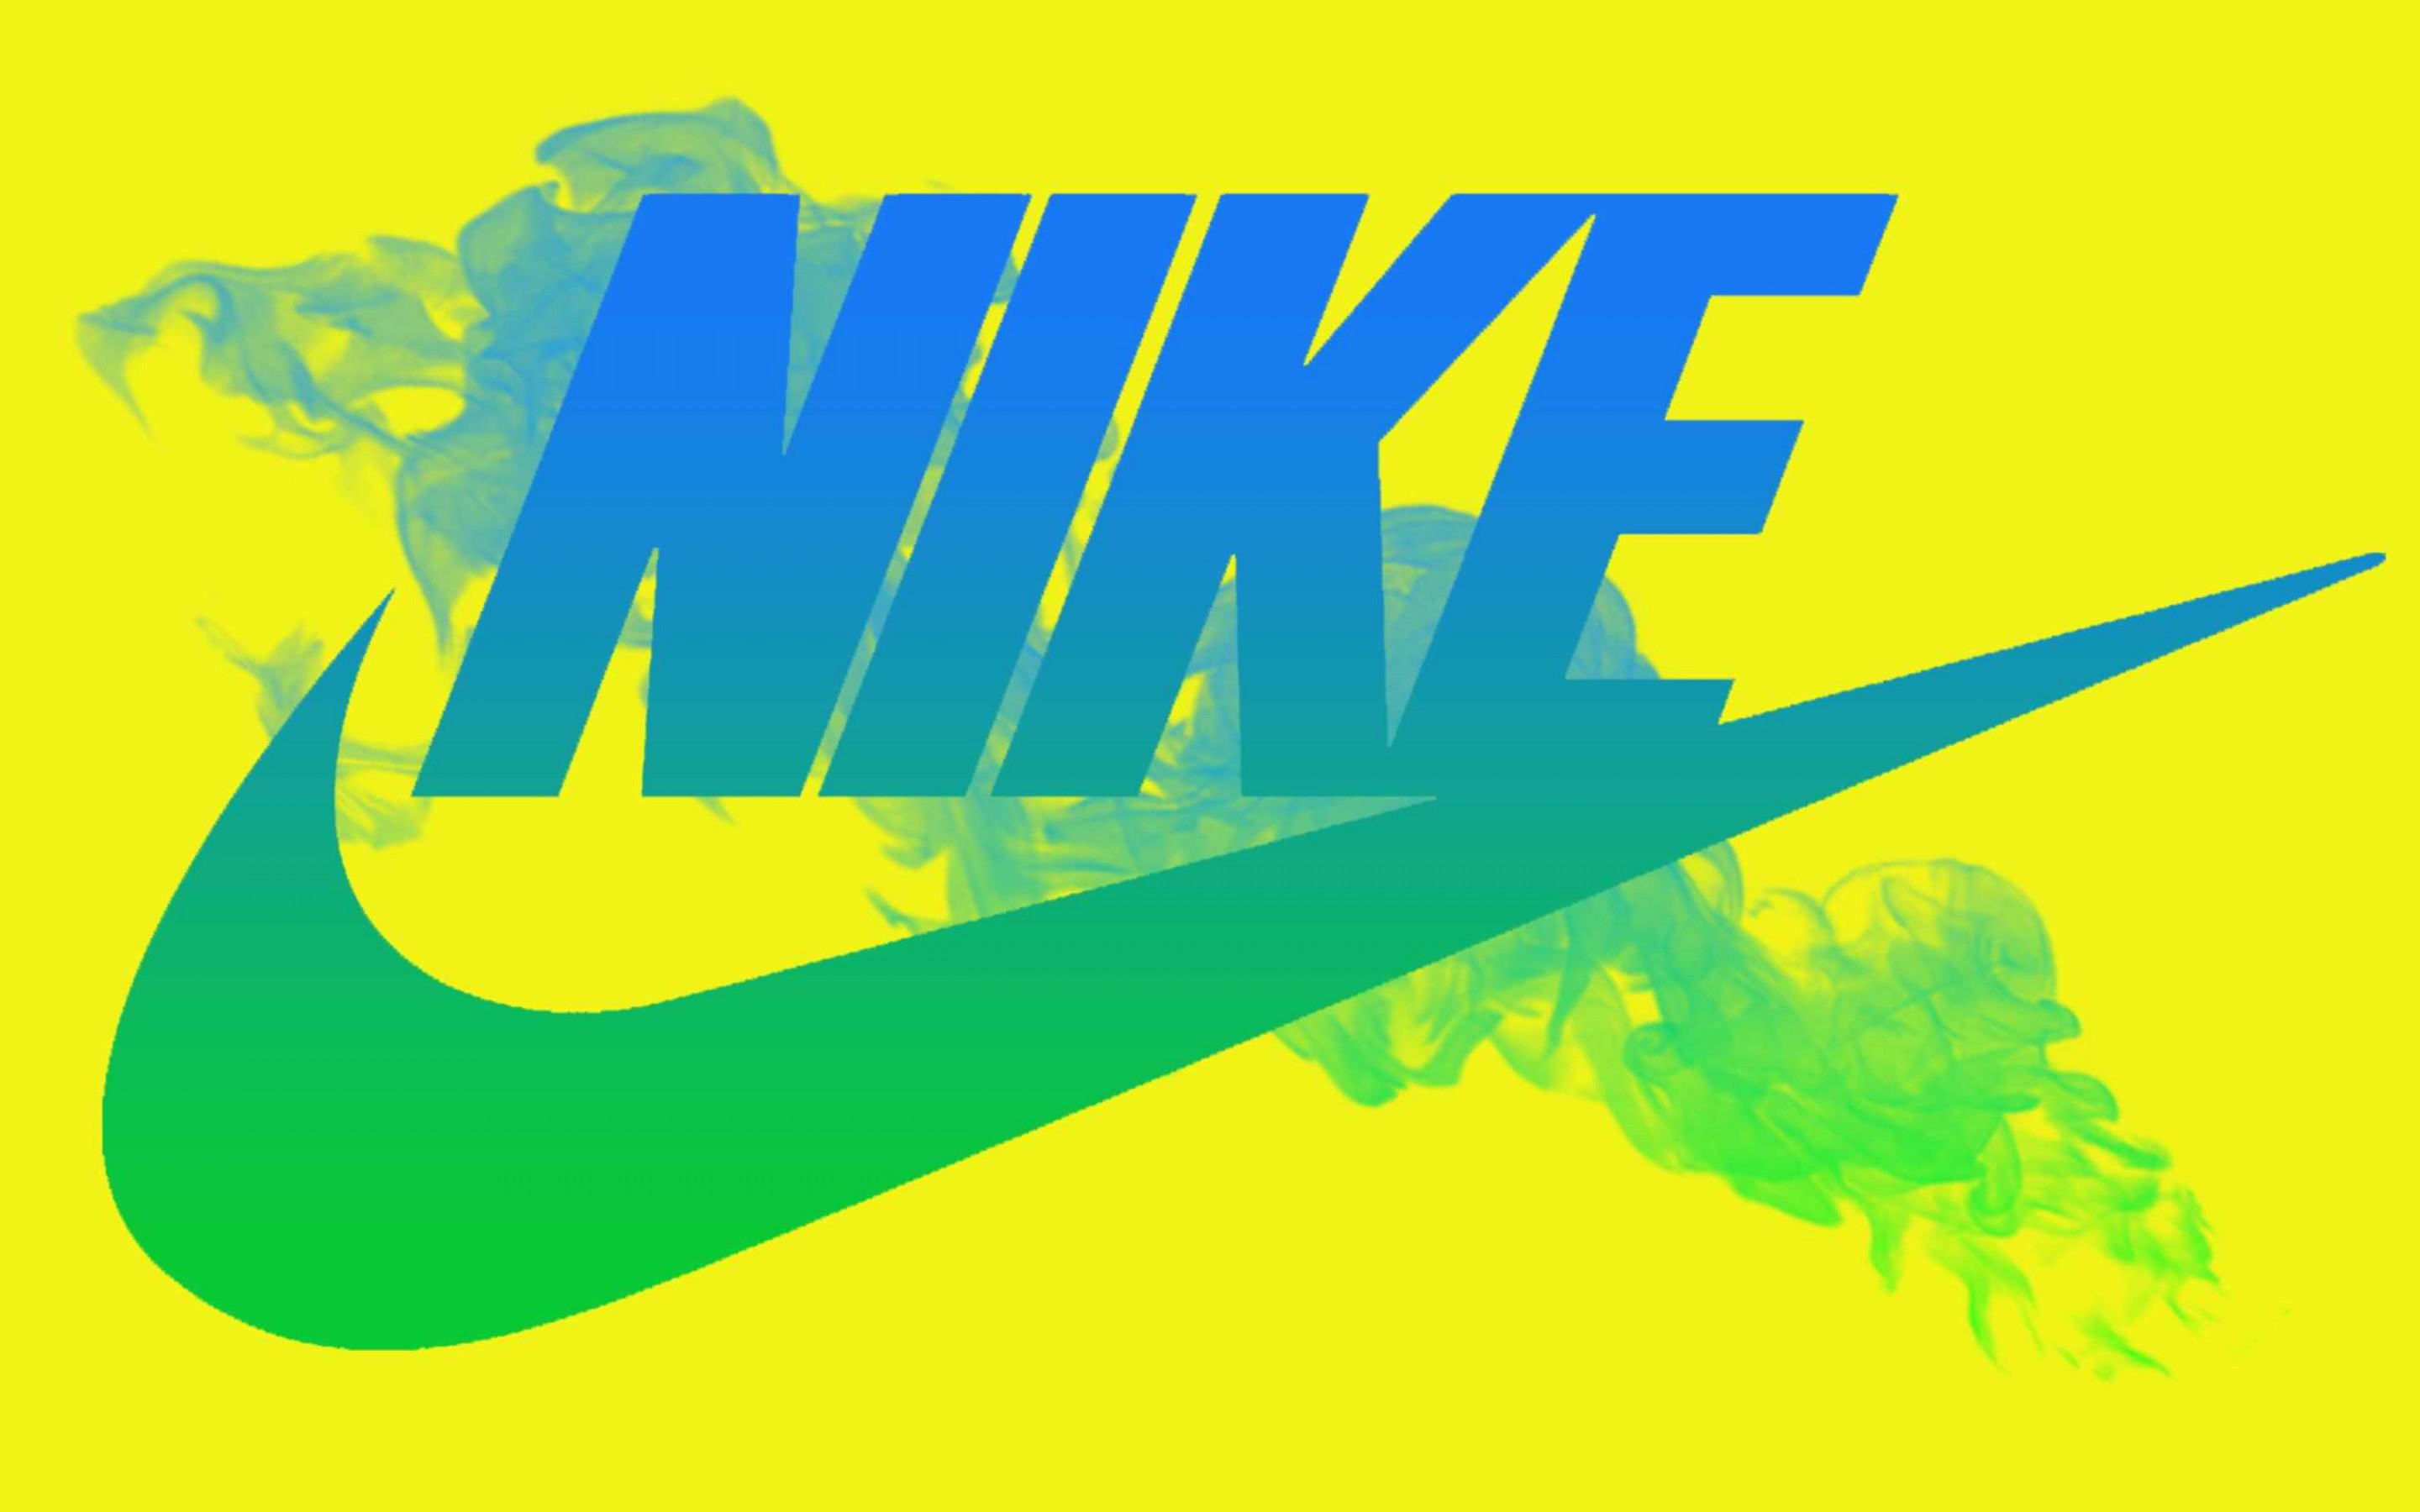 You can download Nike Just Do It Wallpaper HD Resolution di7wh in